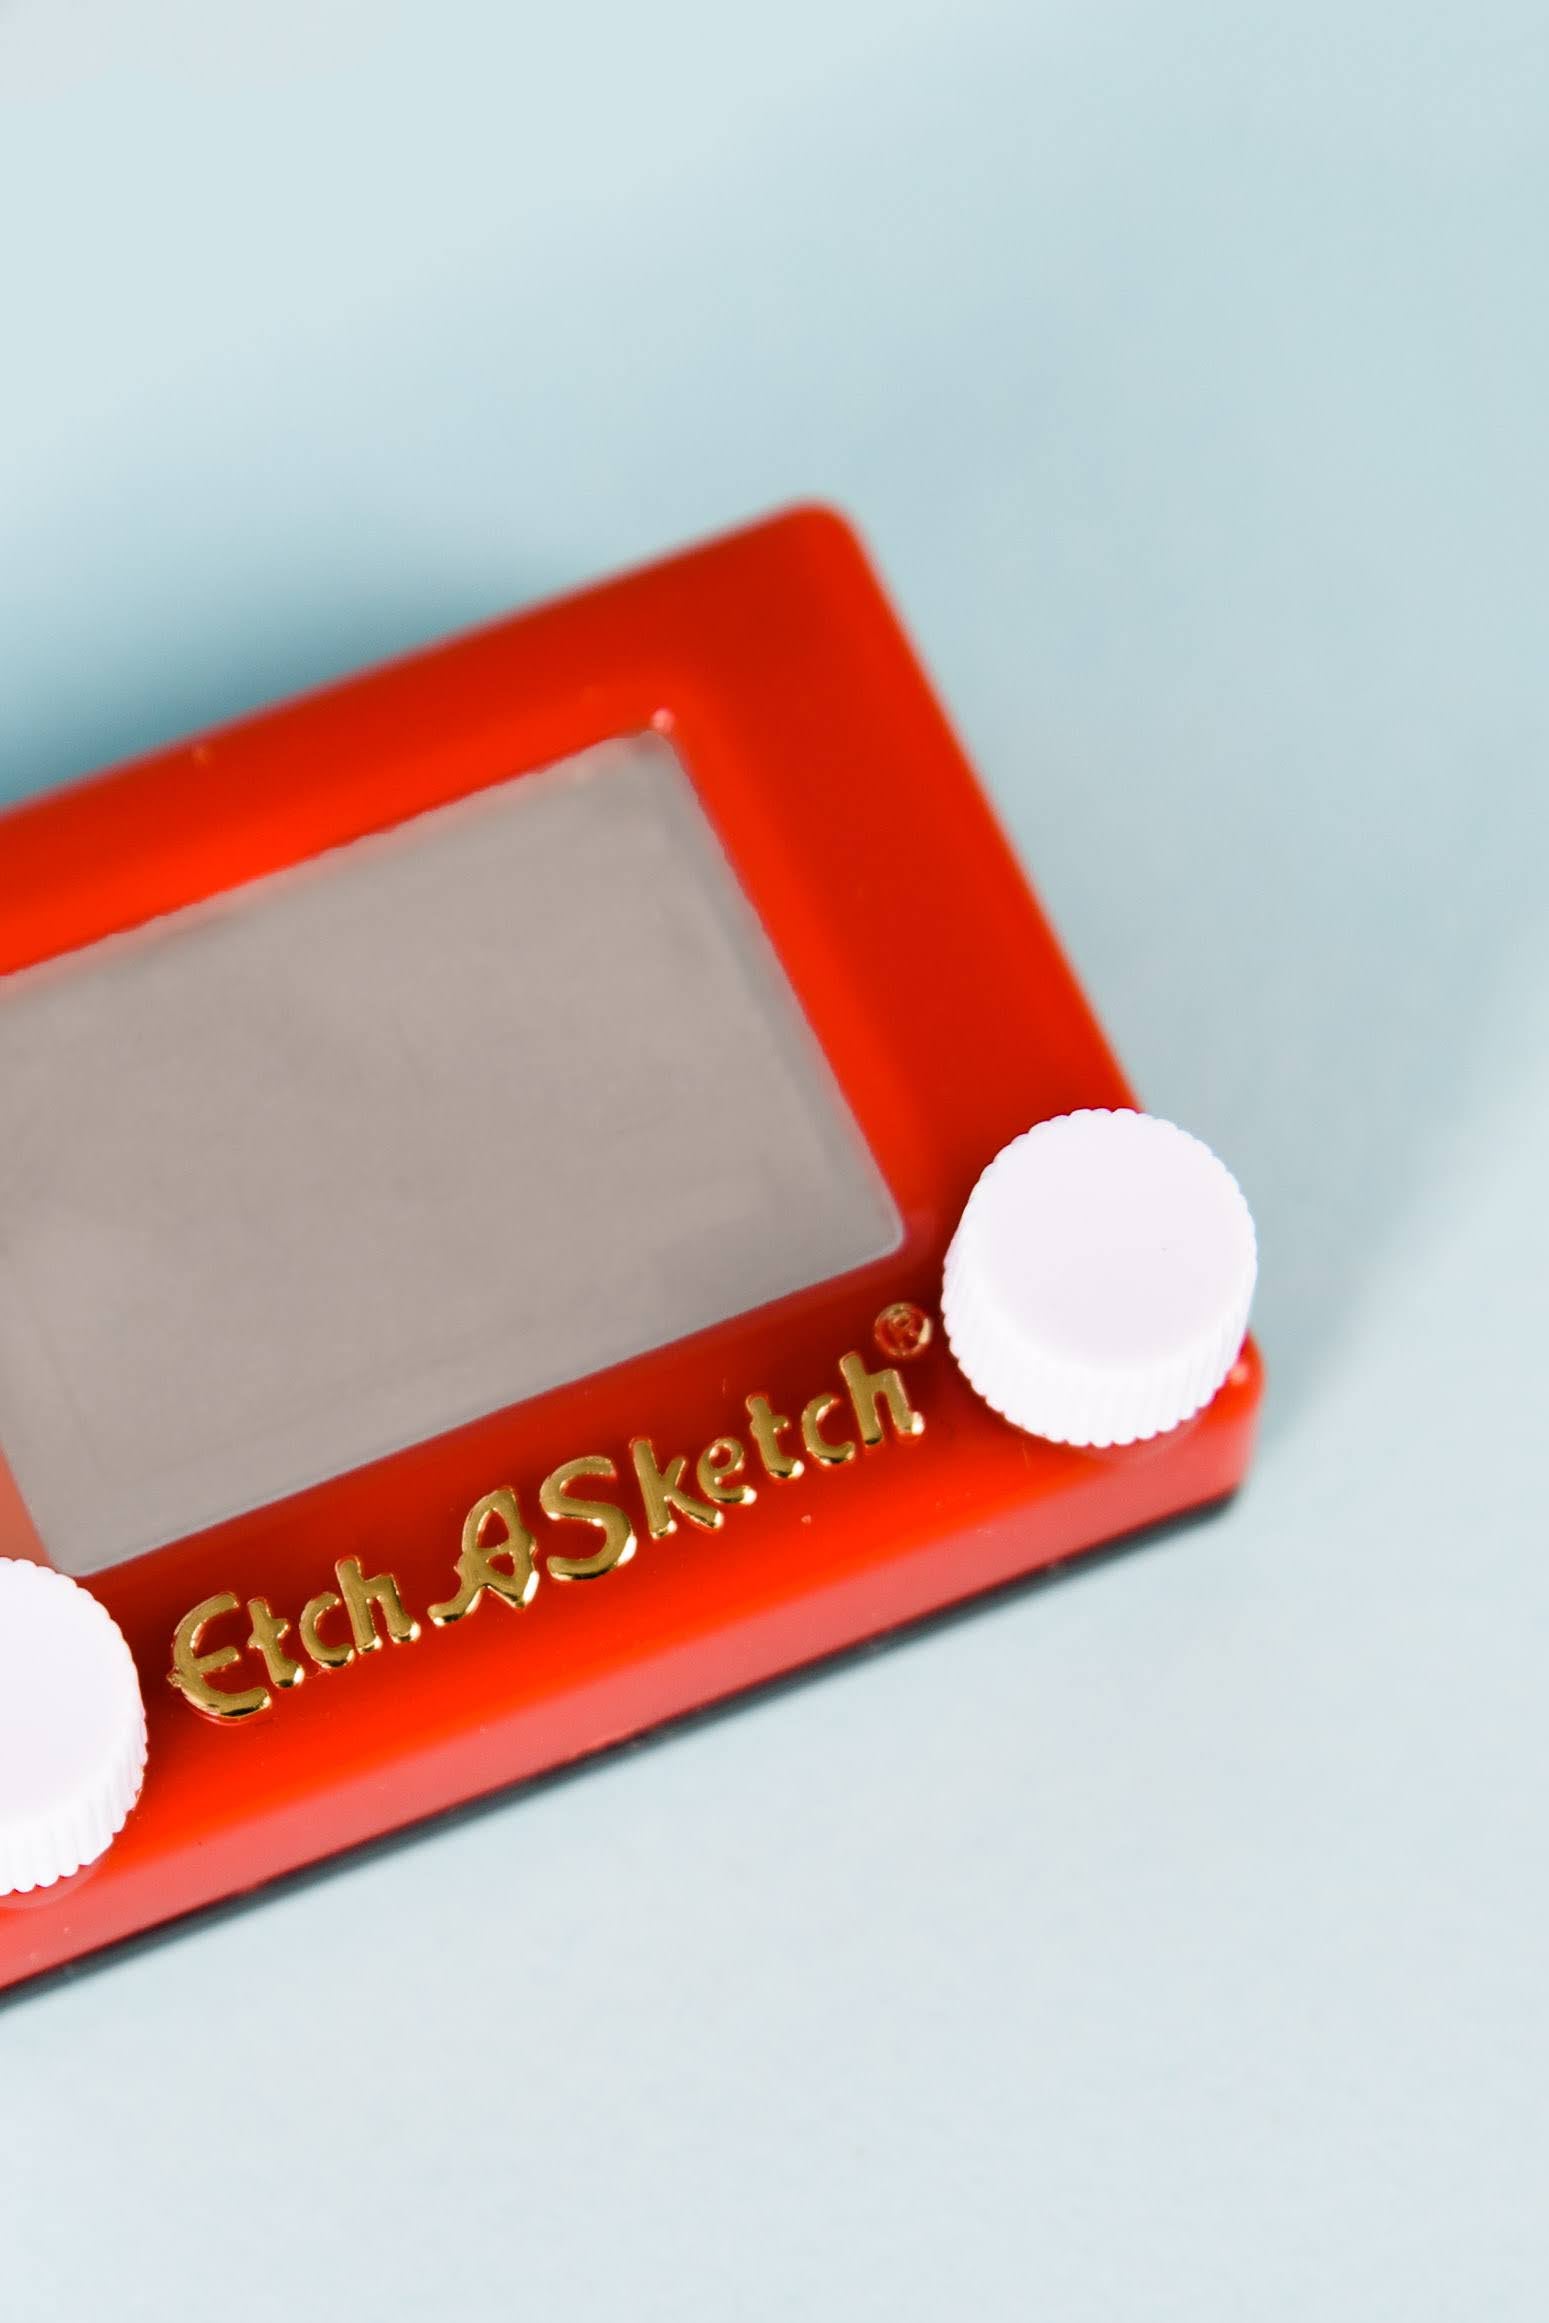 WORLDS SMALLEST ETCH A SKETCH - THE TOY STORE